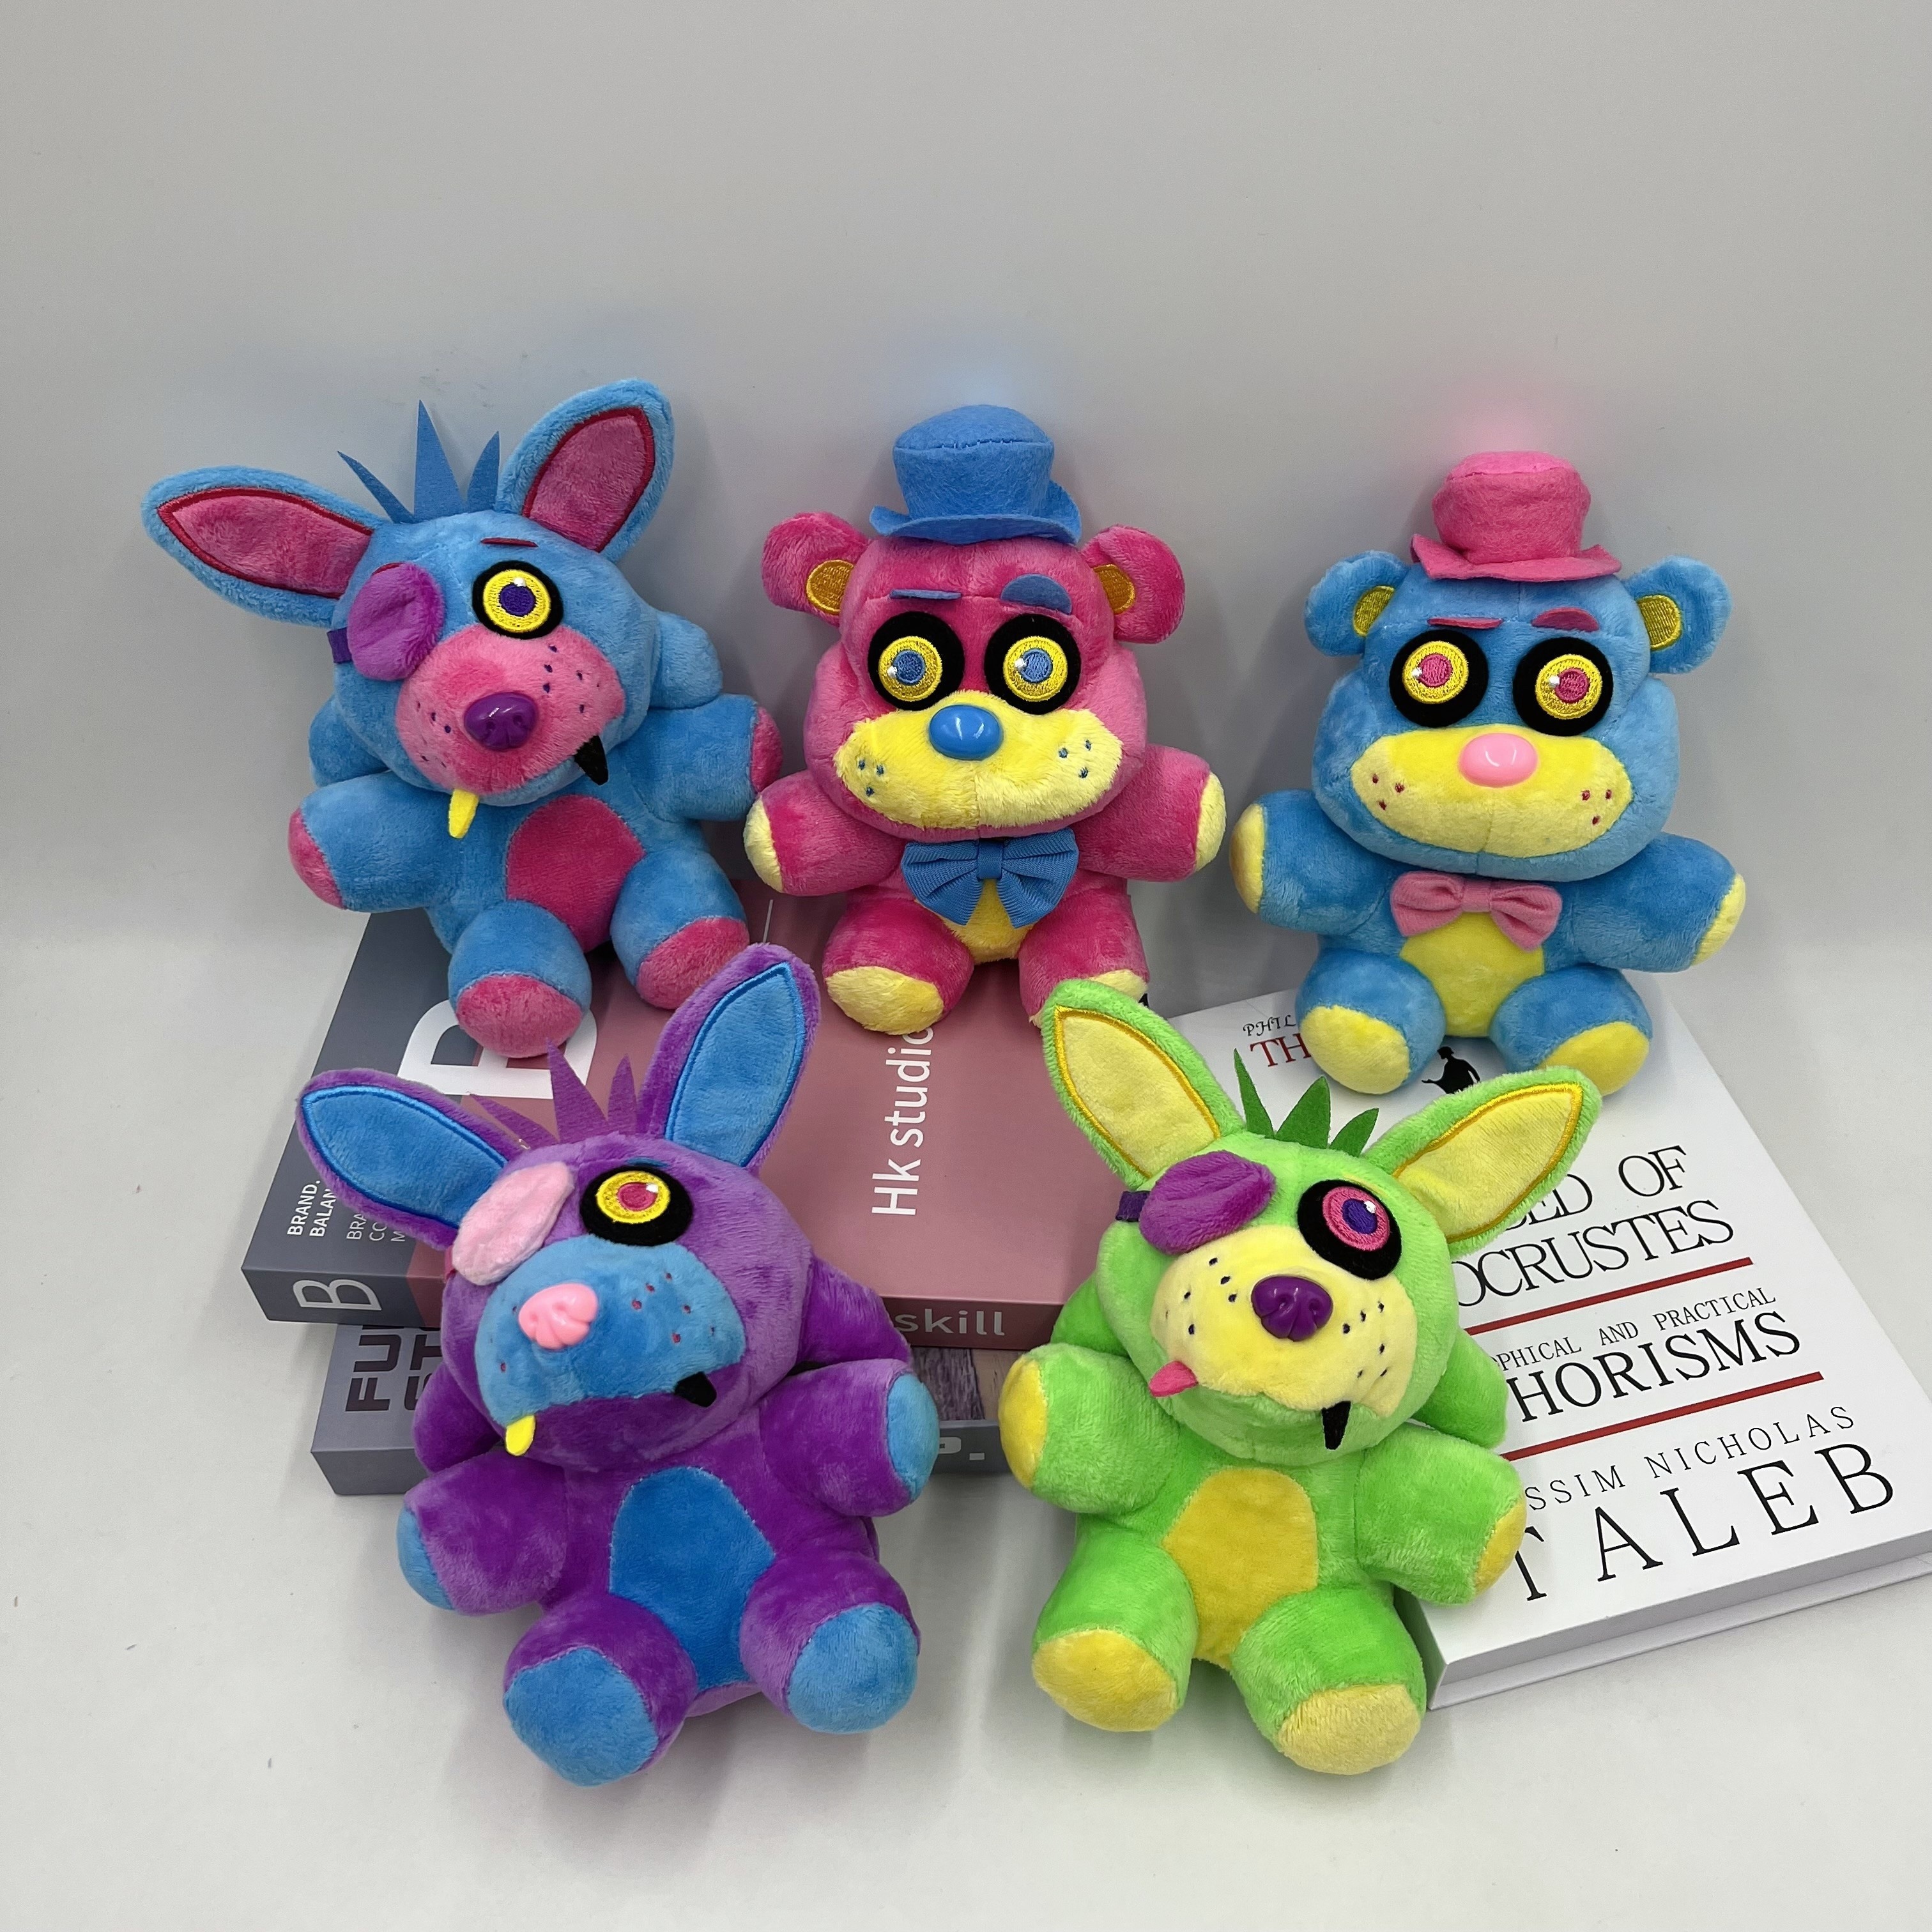 New Arrive FNAF Five Nights At Freddy's Security Breach Plush Toy Stuffed  Animal Foxy Doll Gifts For Girls Boys